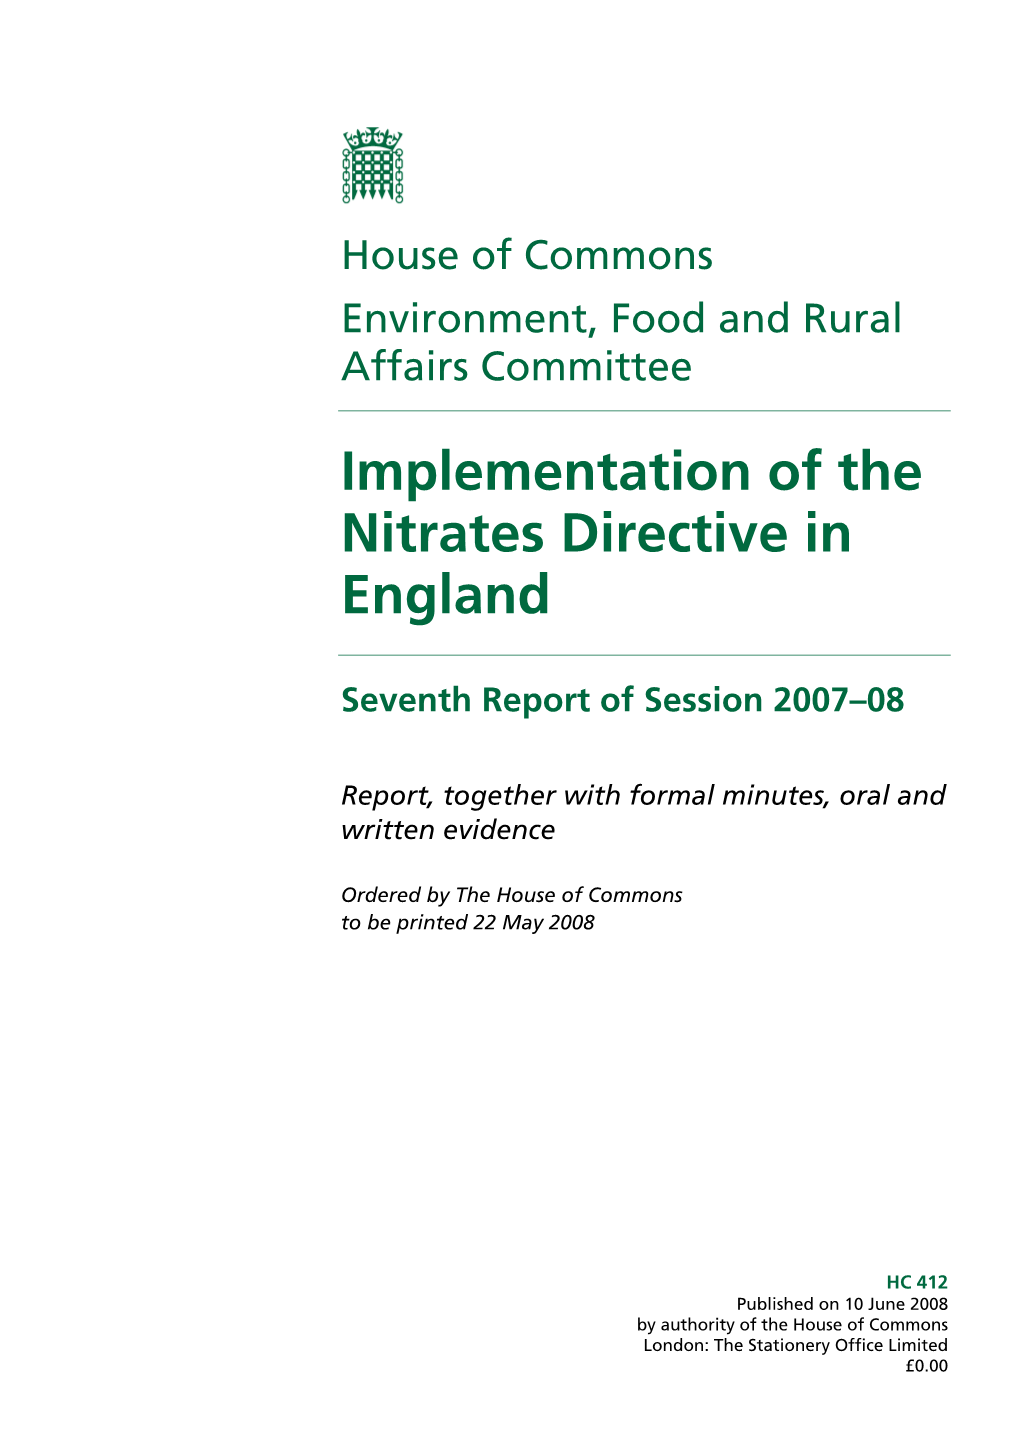 Implementation of the Nitrates Directive in England